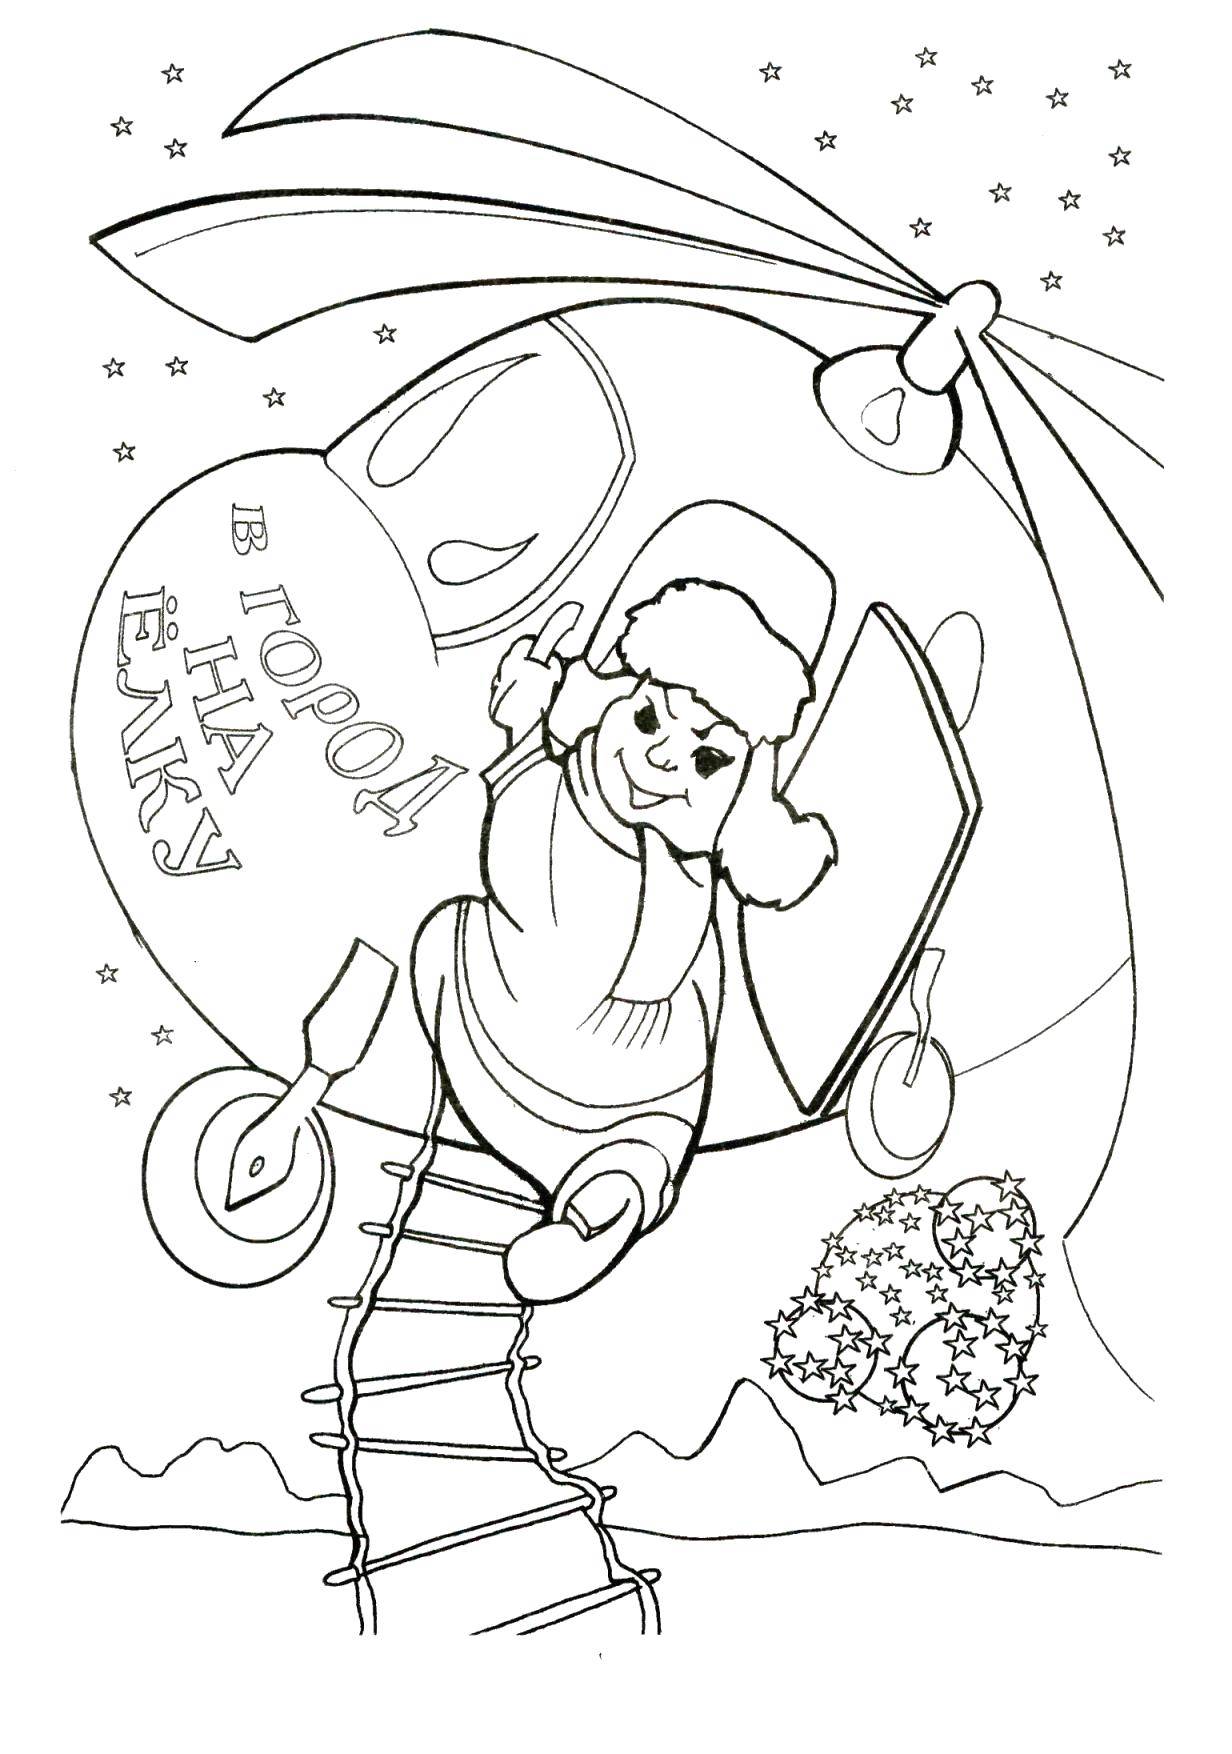 Coloring New year is coming. Category new year. Tags:  New Year, gifts.